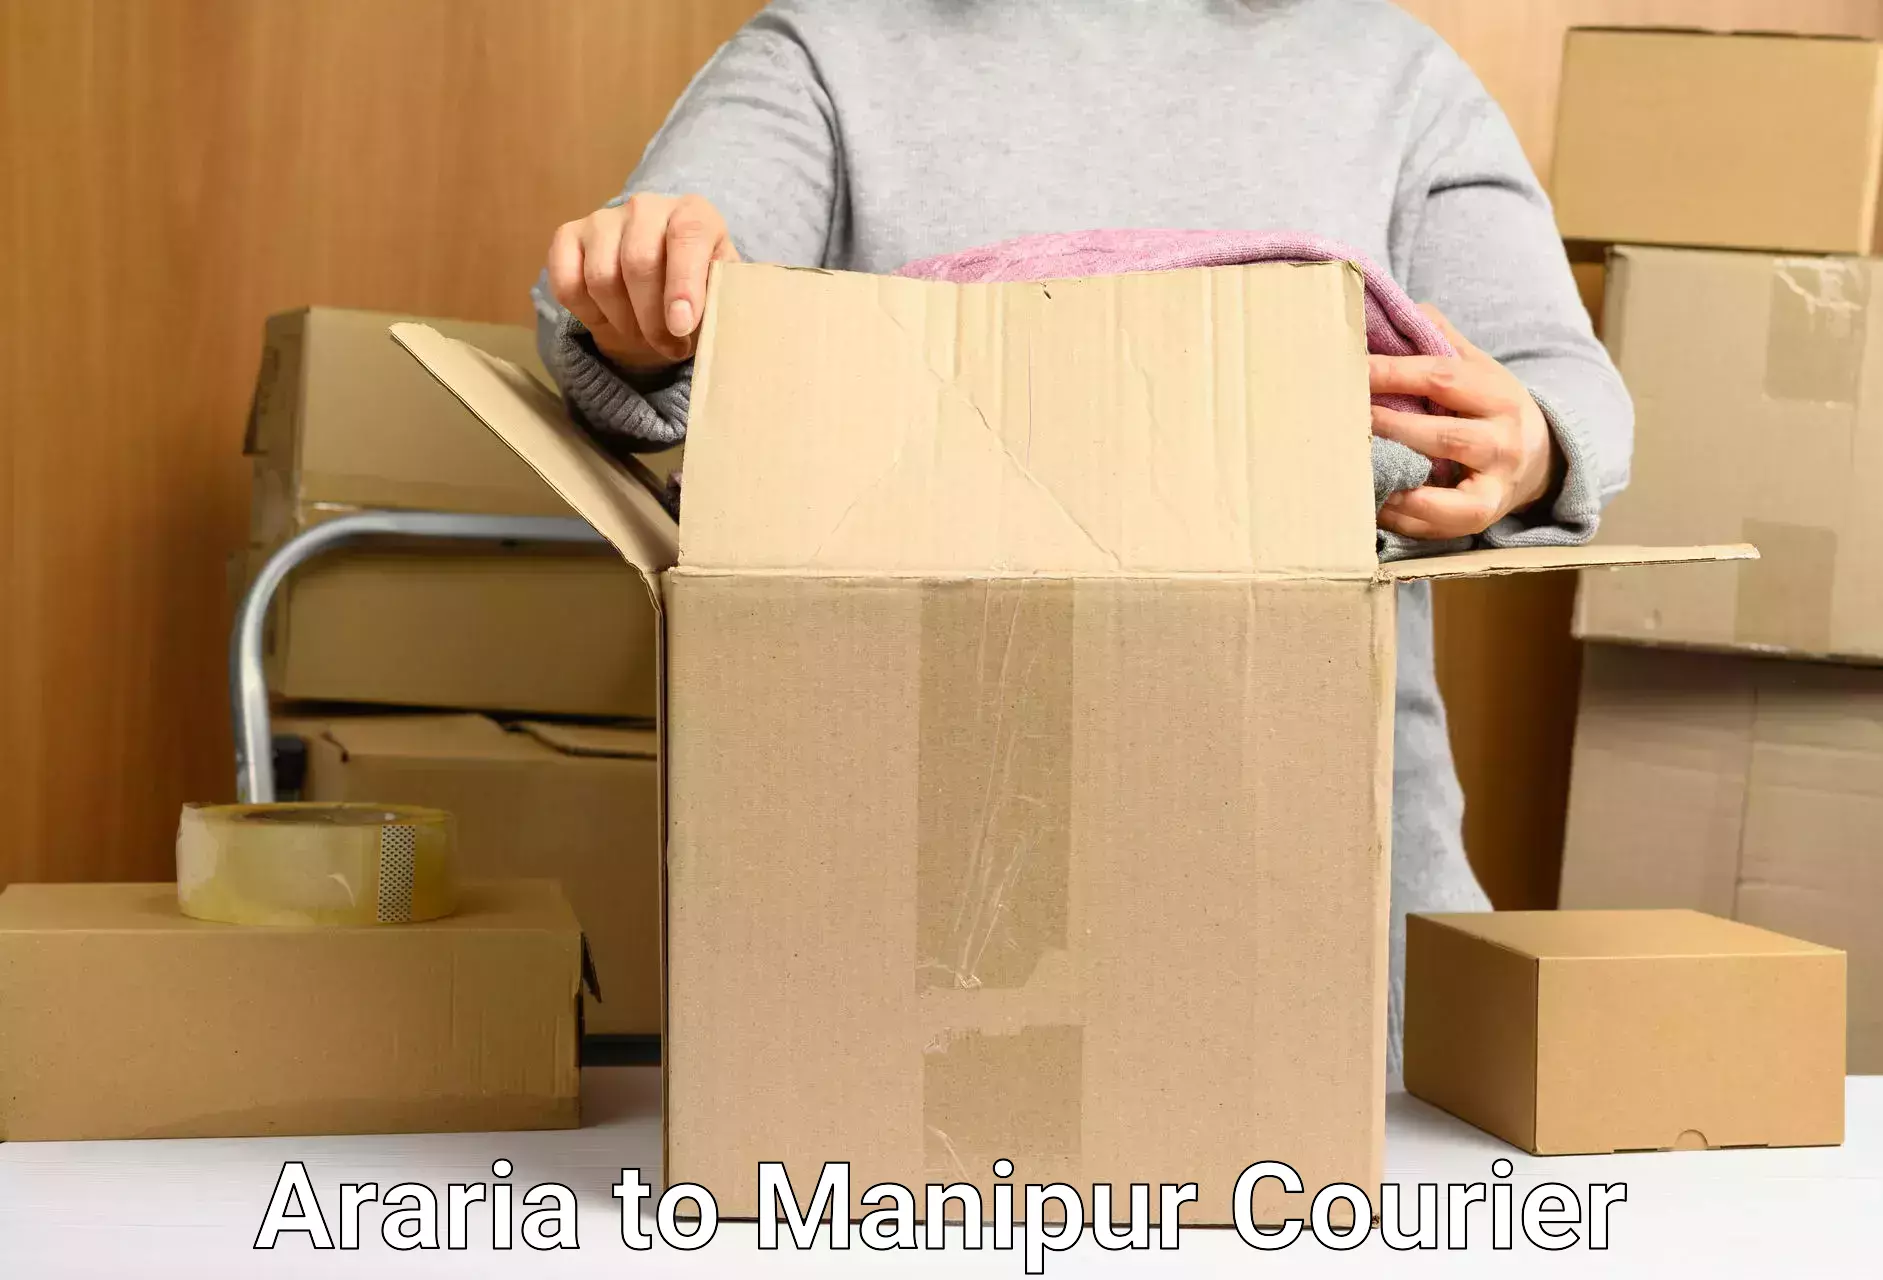 On-call courier service Araria to Manipur